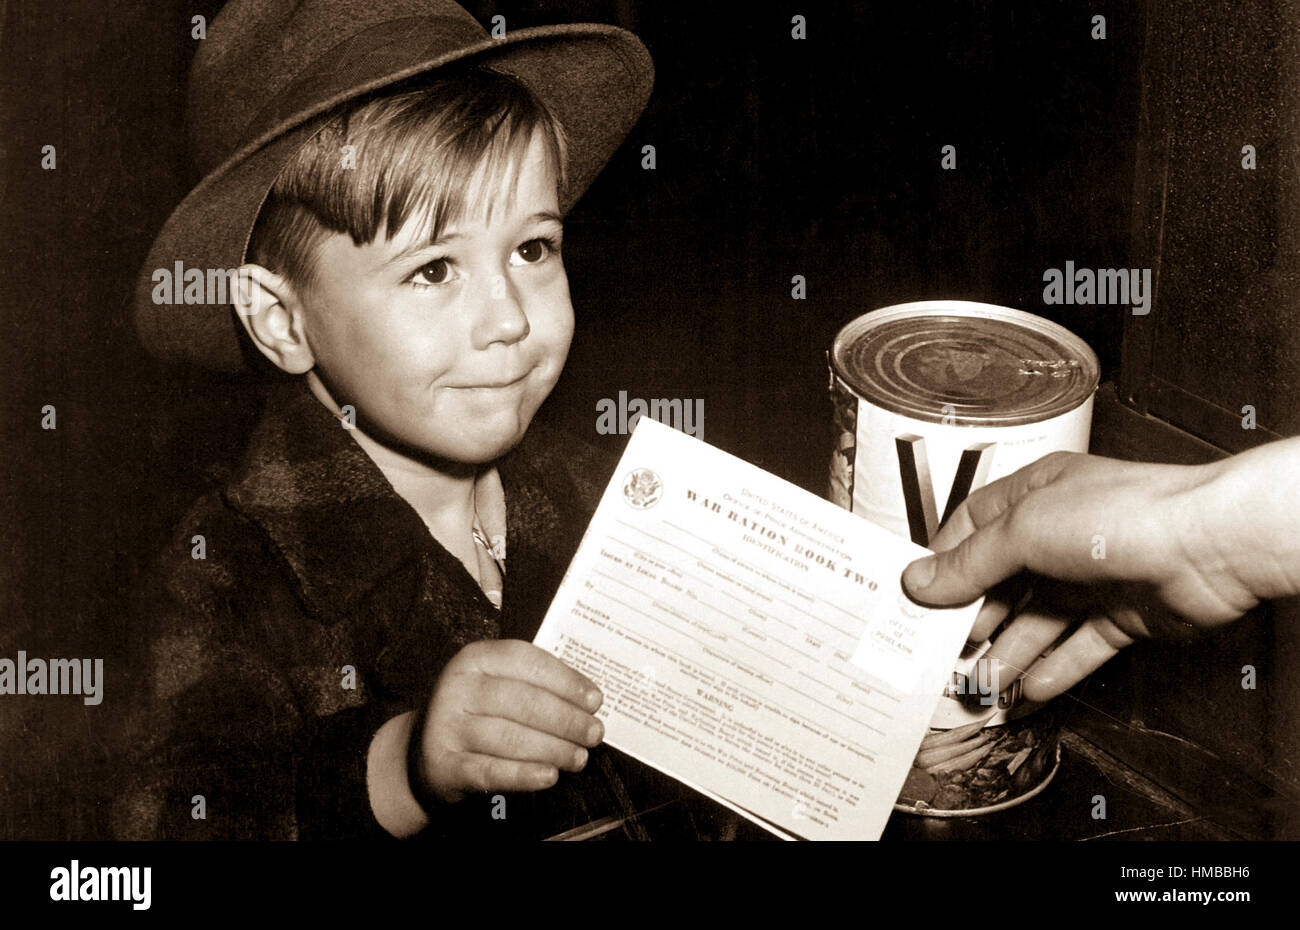 An eager school boy gets his first experience in using War Ration Book Two.  With many parents engaged in war work, children are being taught the facts of point rationing for helping out in family marketing.  February 1943.  Alfred Palmer. (OWI) Exact Date Shot Unknown NARA FILE #:  208-AA-322H-1 WAR & CONFLICT #:  792 Stock Photo